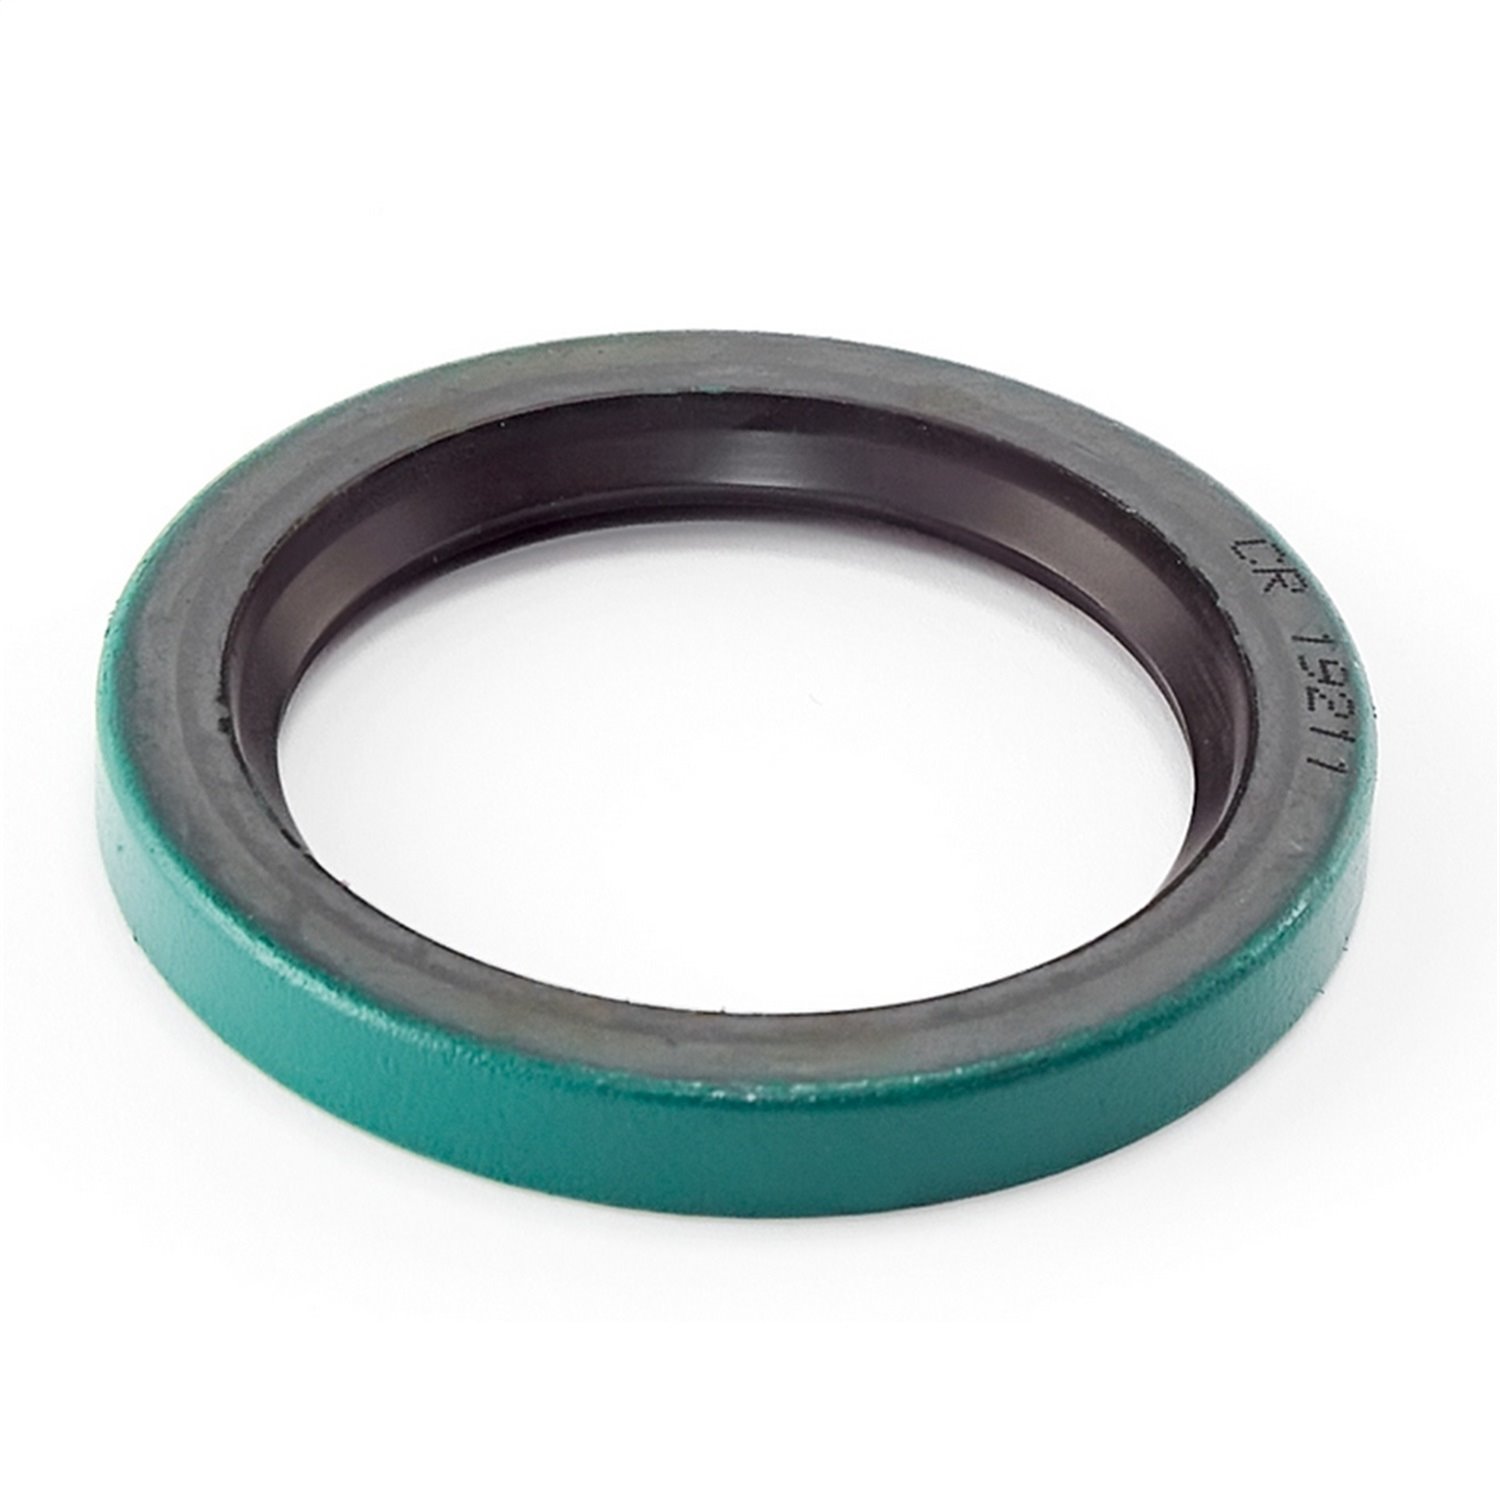 This rear output oil seal from Omix-ADA fits the NV4500 manual transmission.